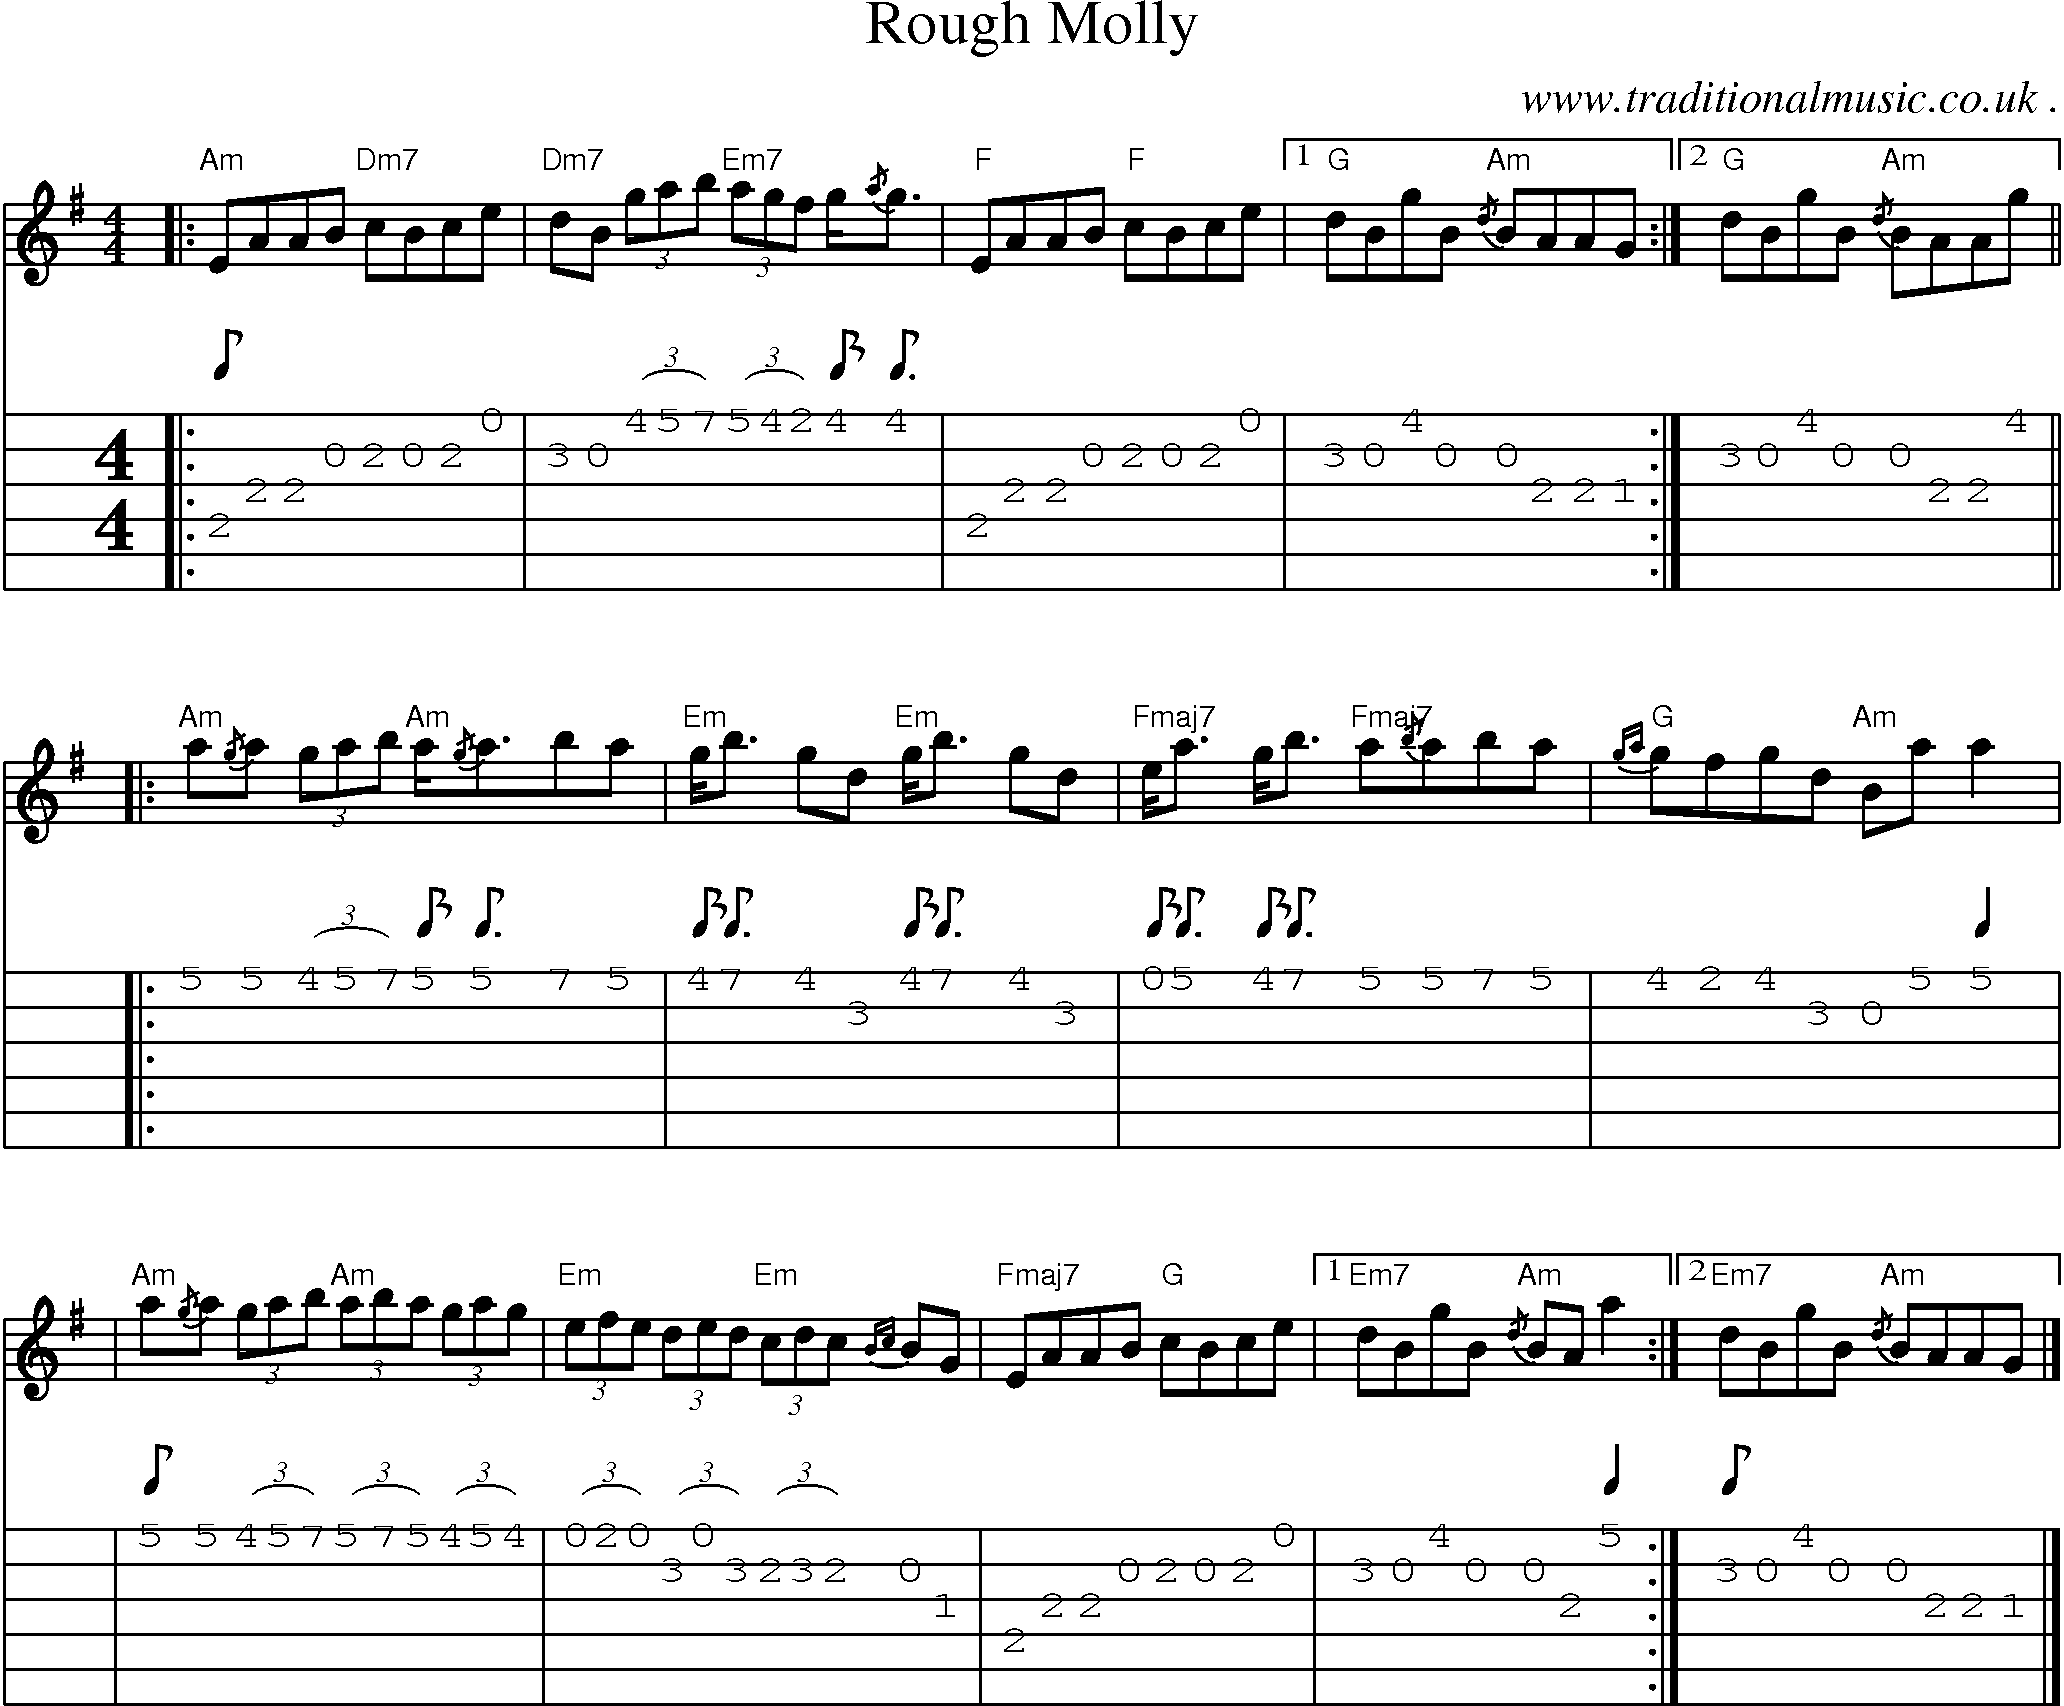 Sheet-music  score, Chords and Guitar Tabs for Rough Molly